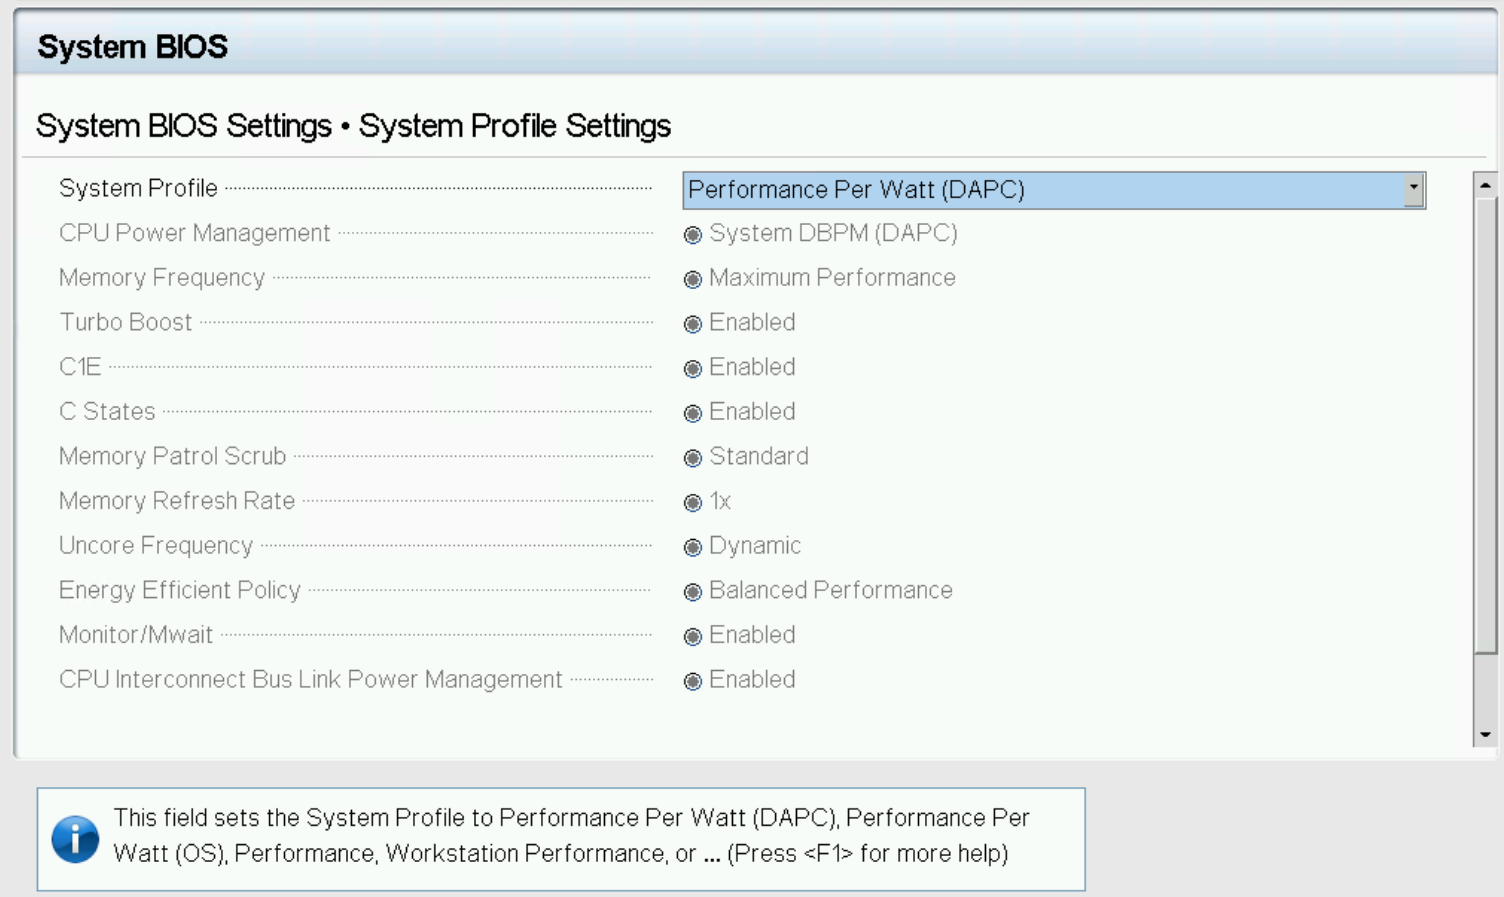 This is a screenshot of the system profile in the BIOS setup, showing all of the different system profile settings, including Performance Per Watt (DAPC).